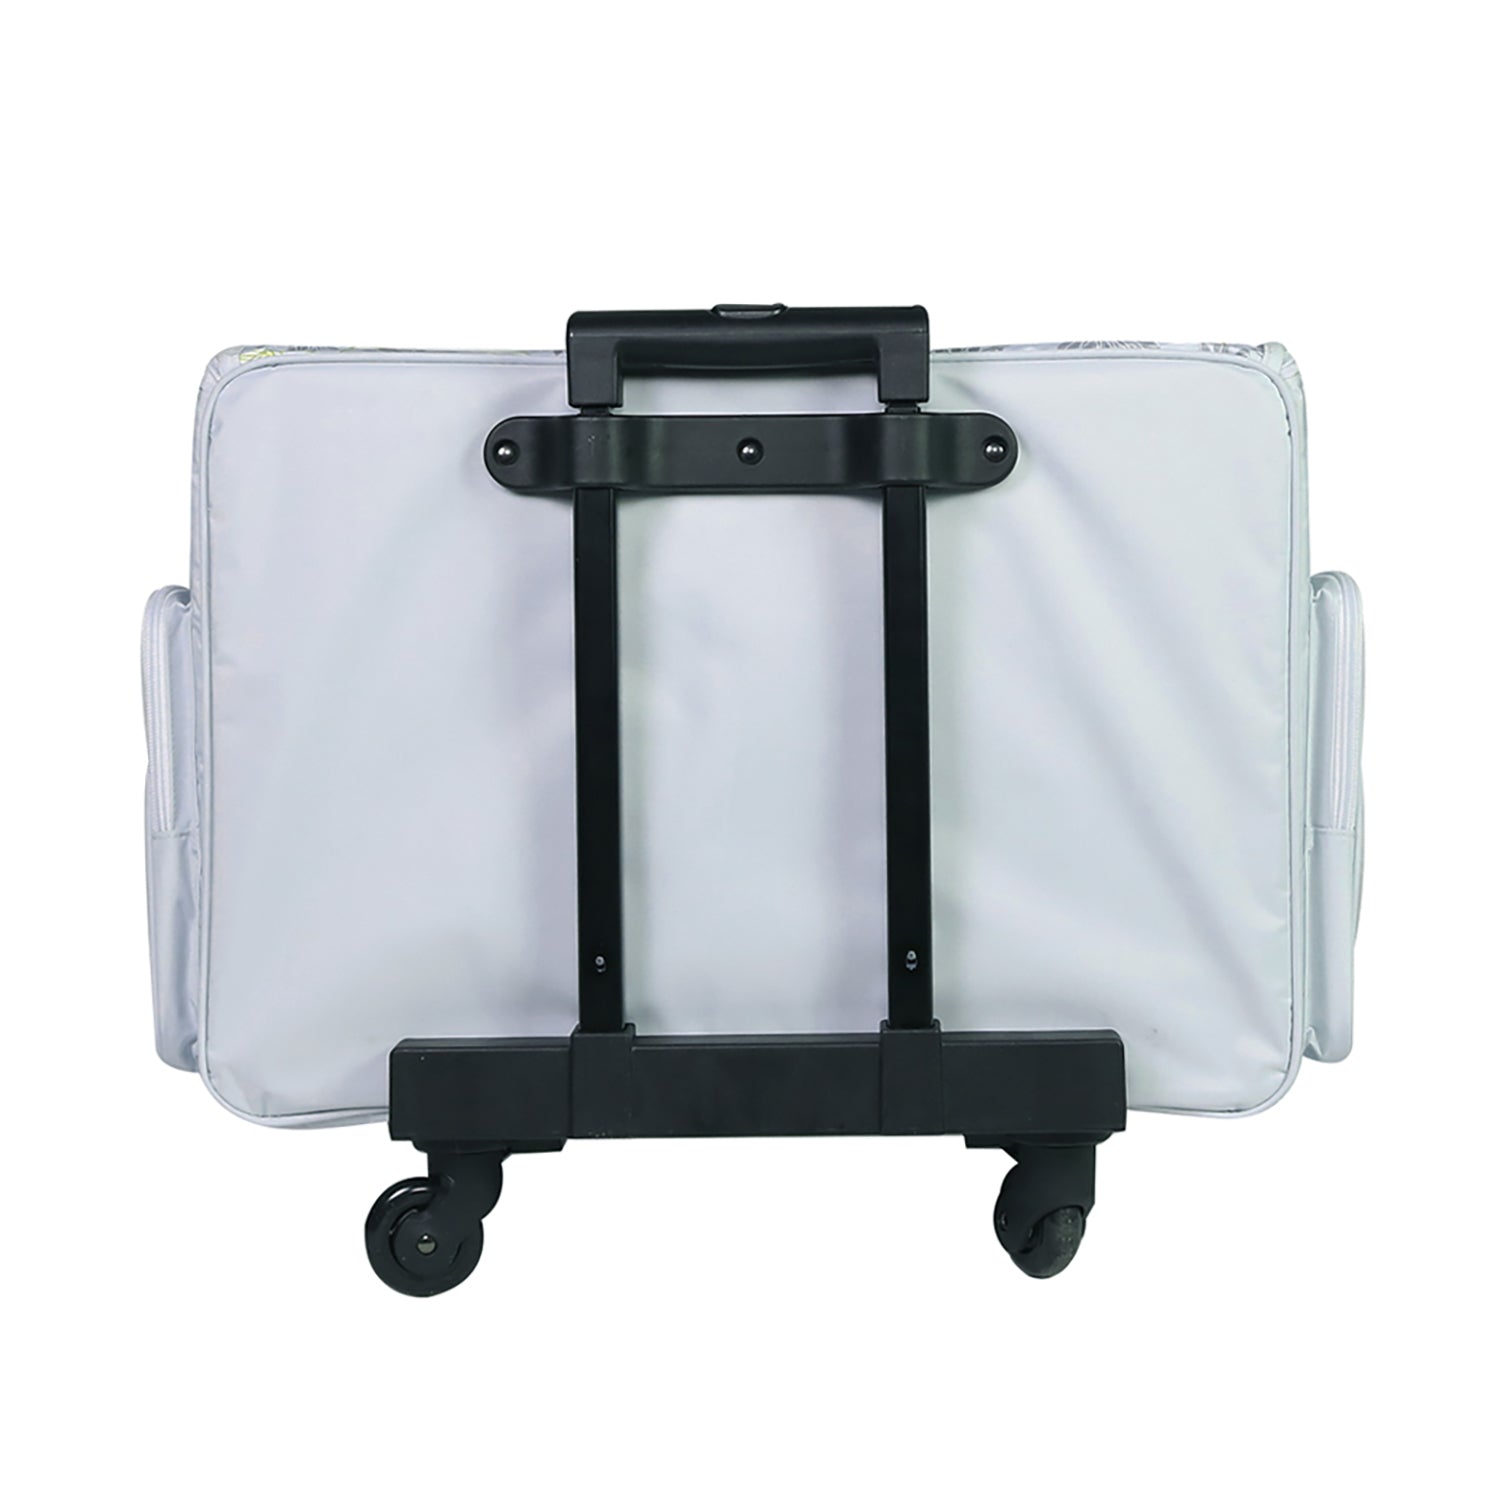 XL 4 Wheel Collapsible Deluxe Rolling Sewing Machine Storage Case, Hea -  Everything Mary